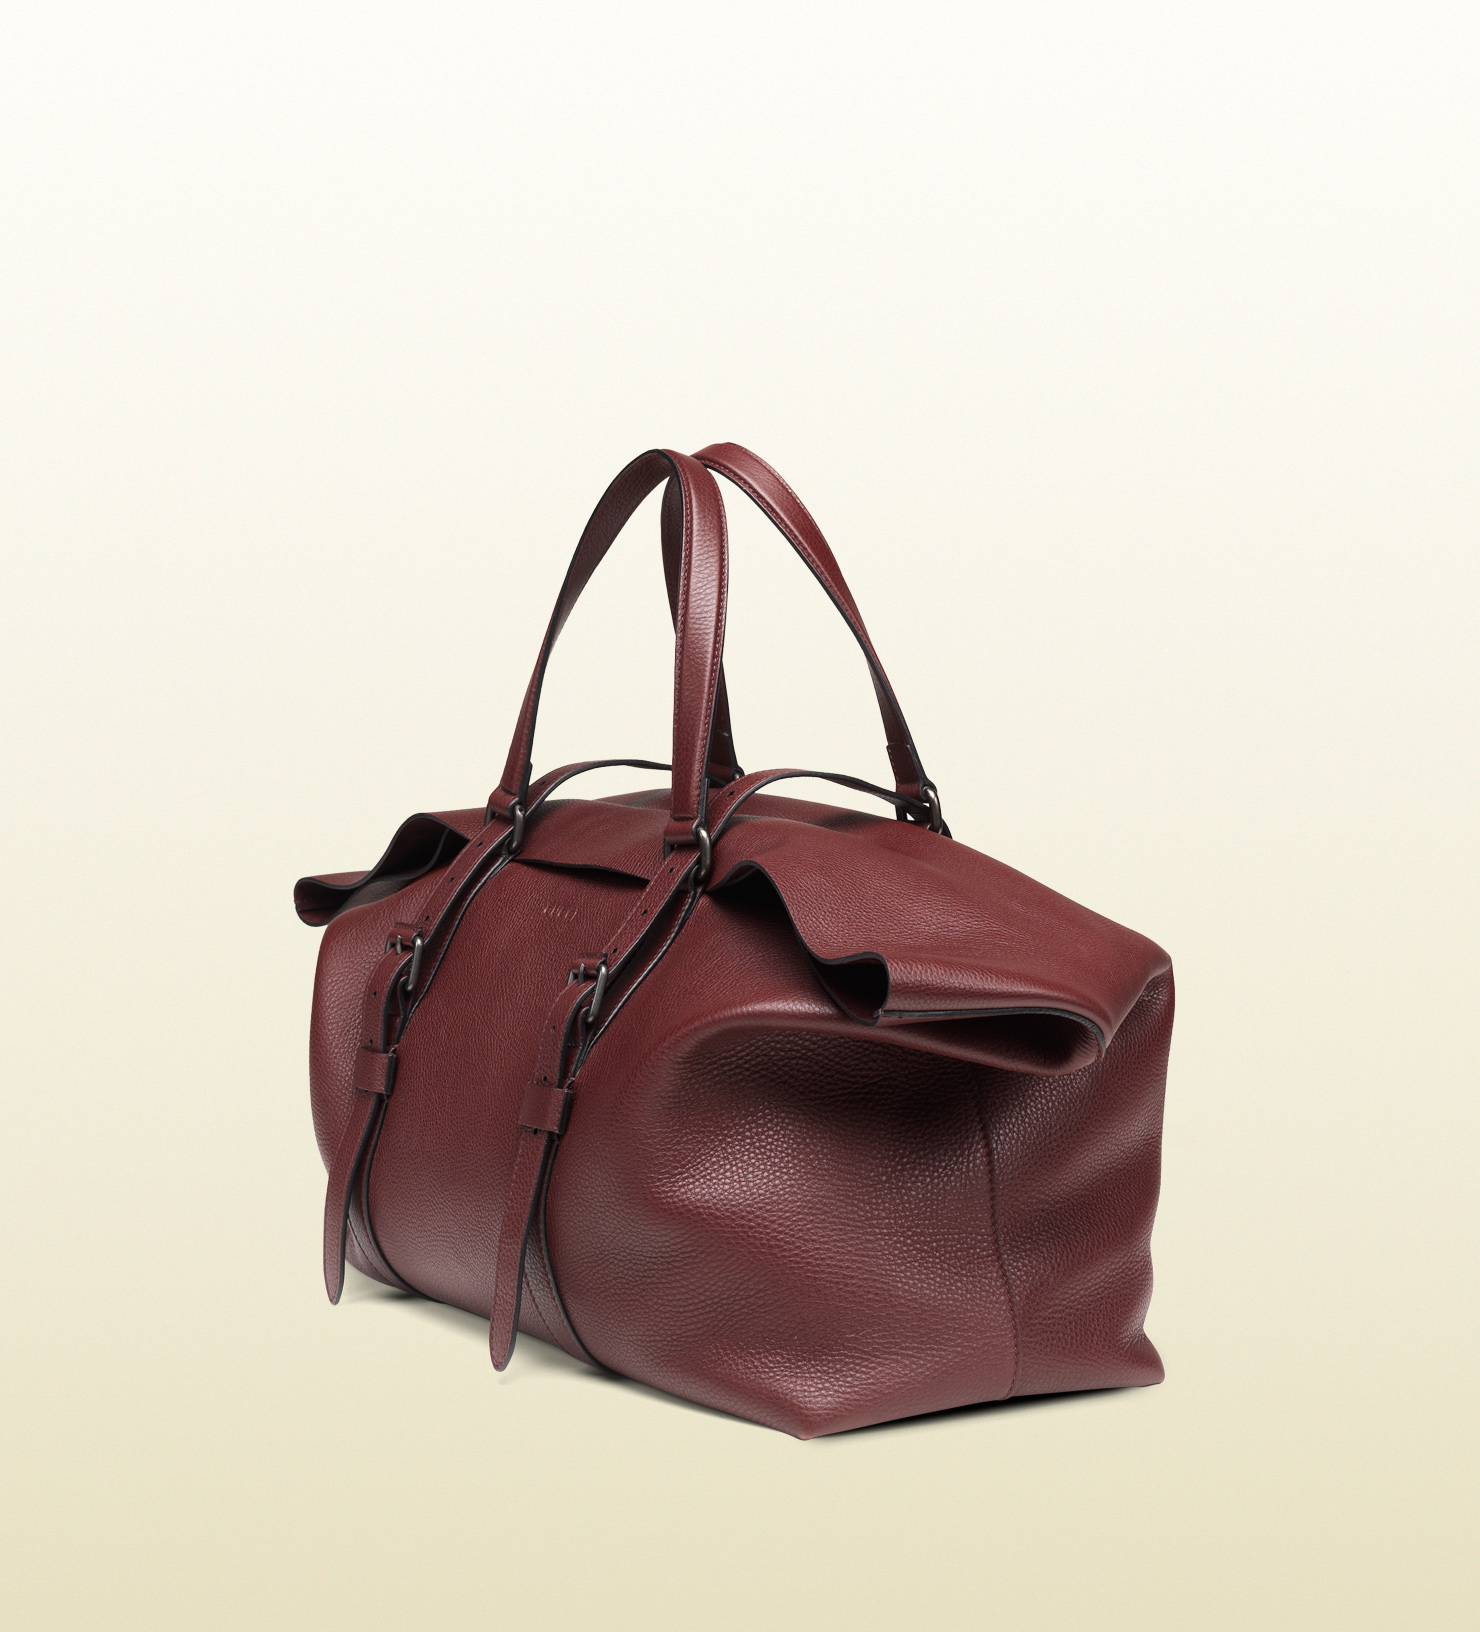 Gucci Leather Top Handle Duffle Bag in Red (bordeaux) | Lyst